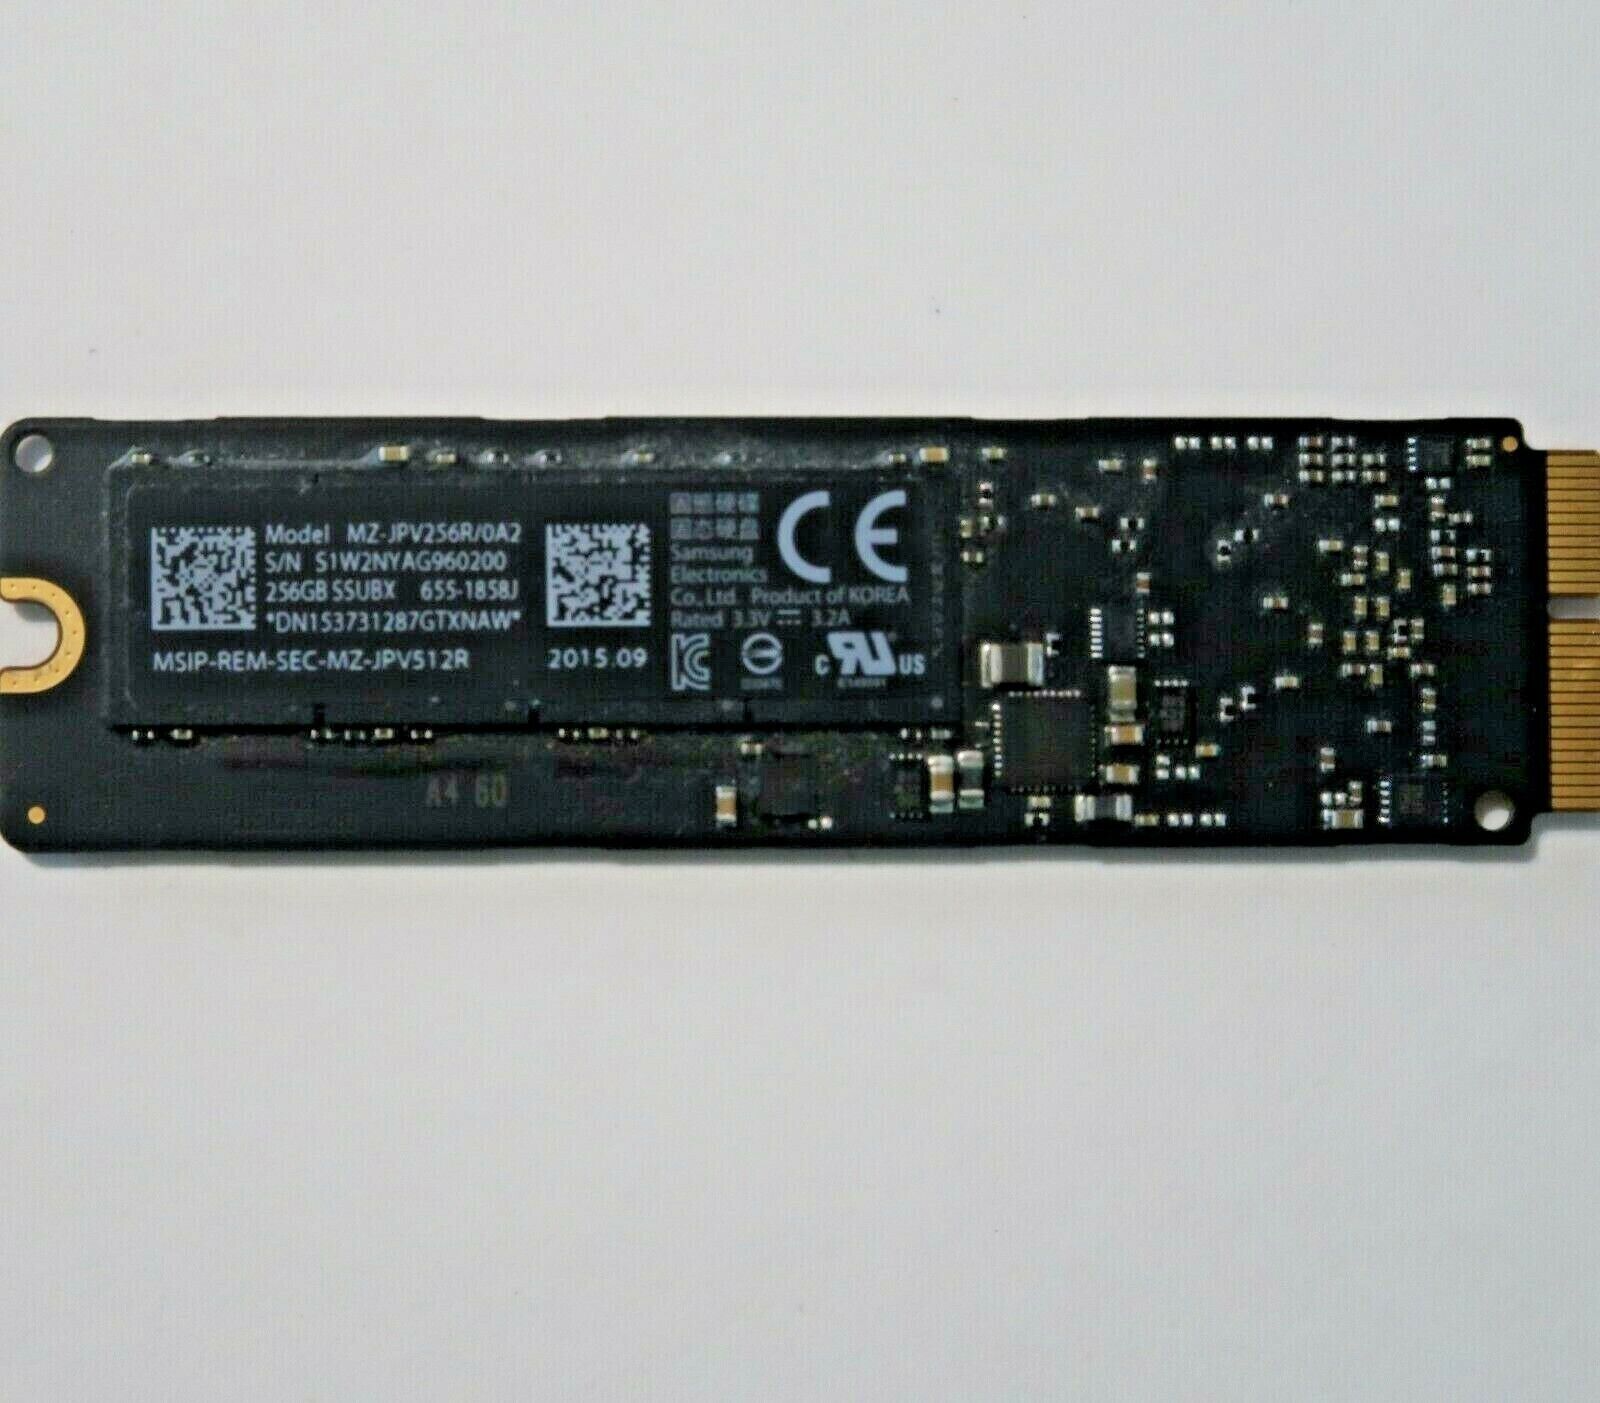 **For Parts/Not Working** Samsung 256GB (MZ-JPV256R/0A2) SSD Apple# 655-1858J